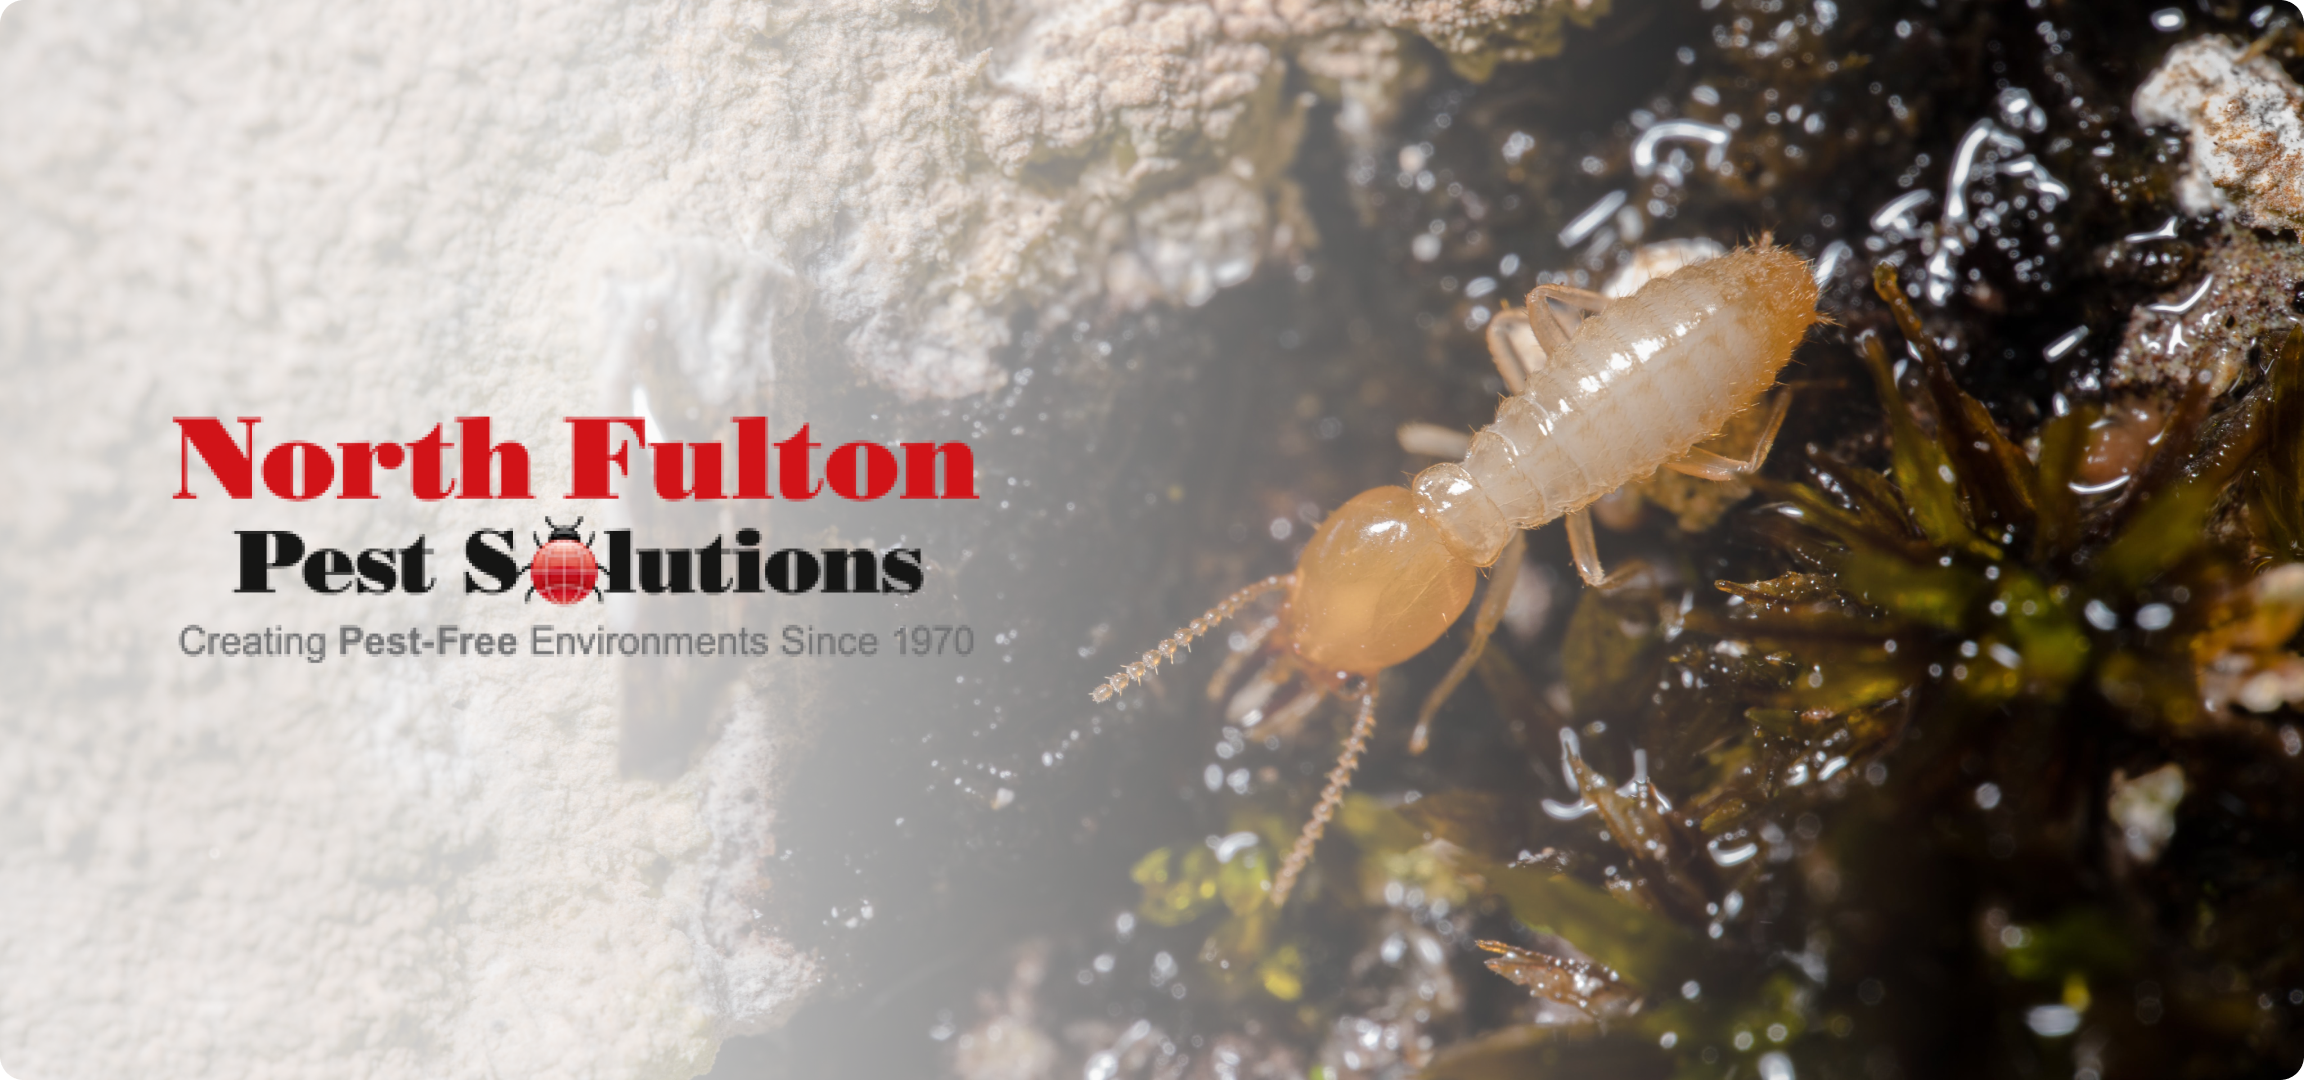 North Fulton Pest Solutions experts conducting a thorough termite inspection at a Kennesaw property.